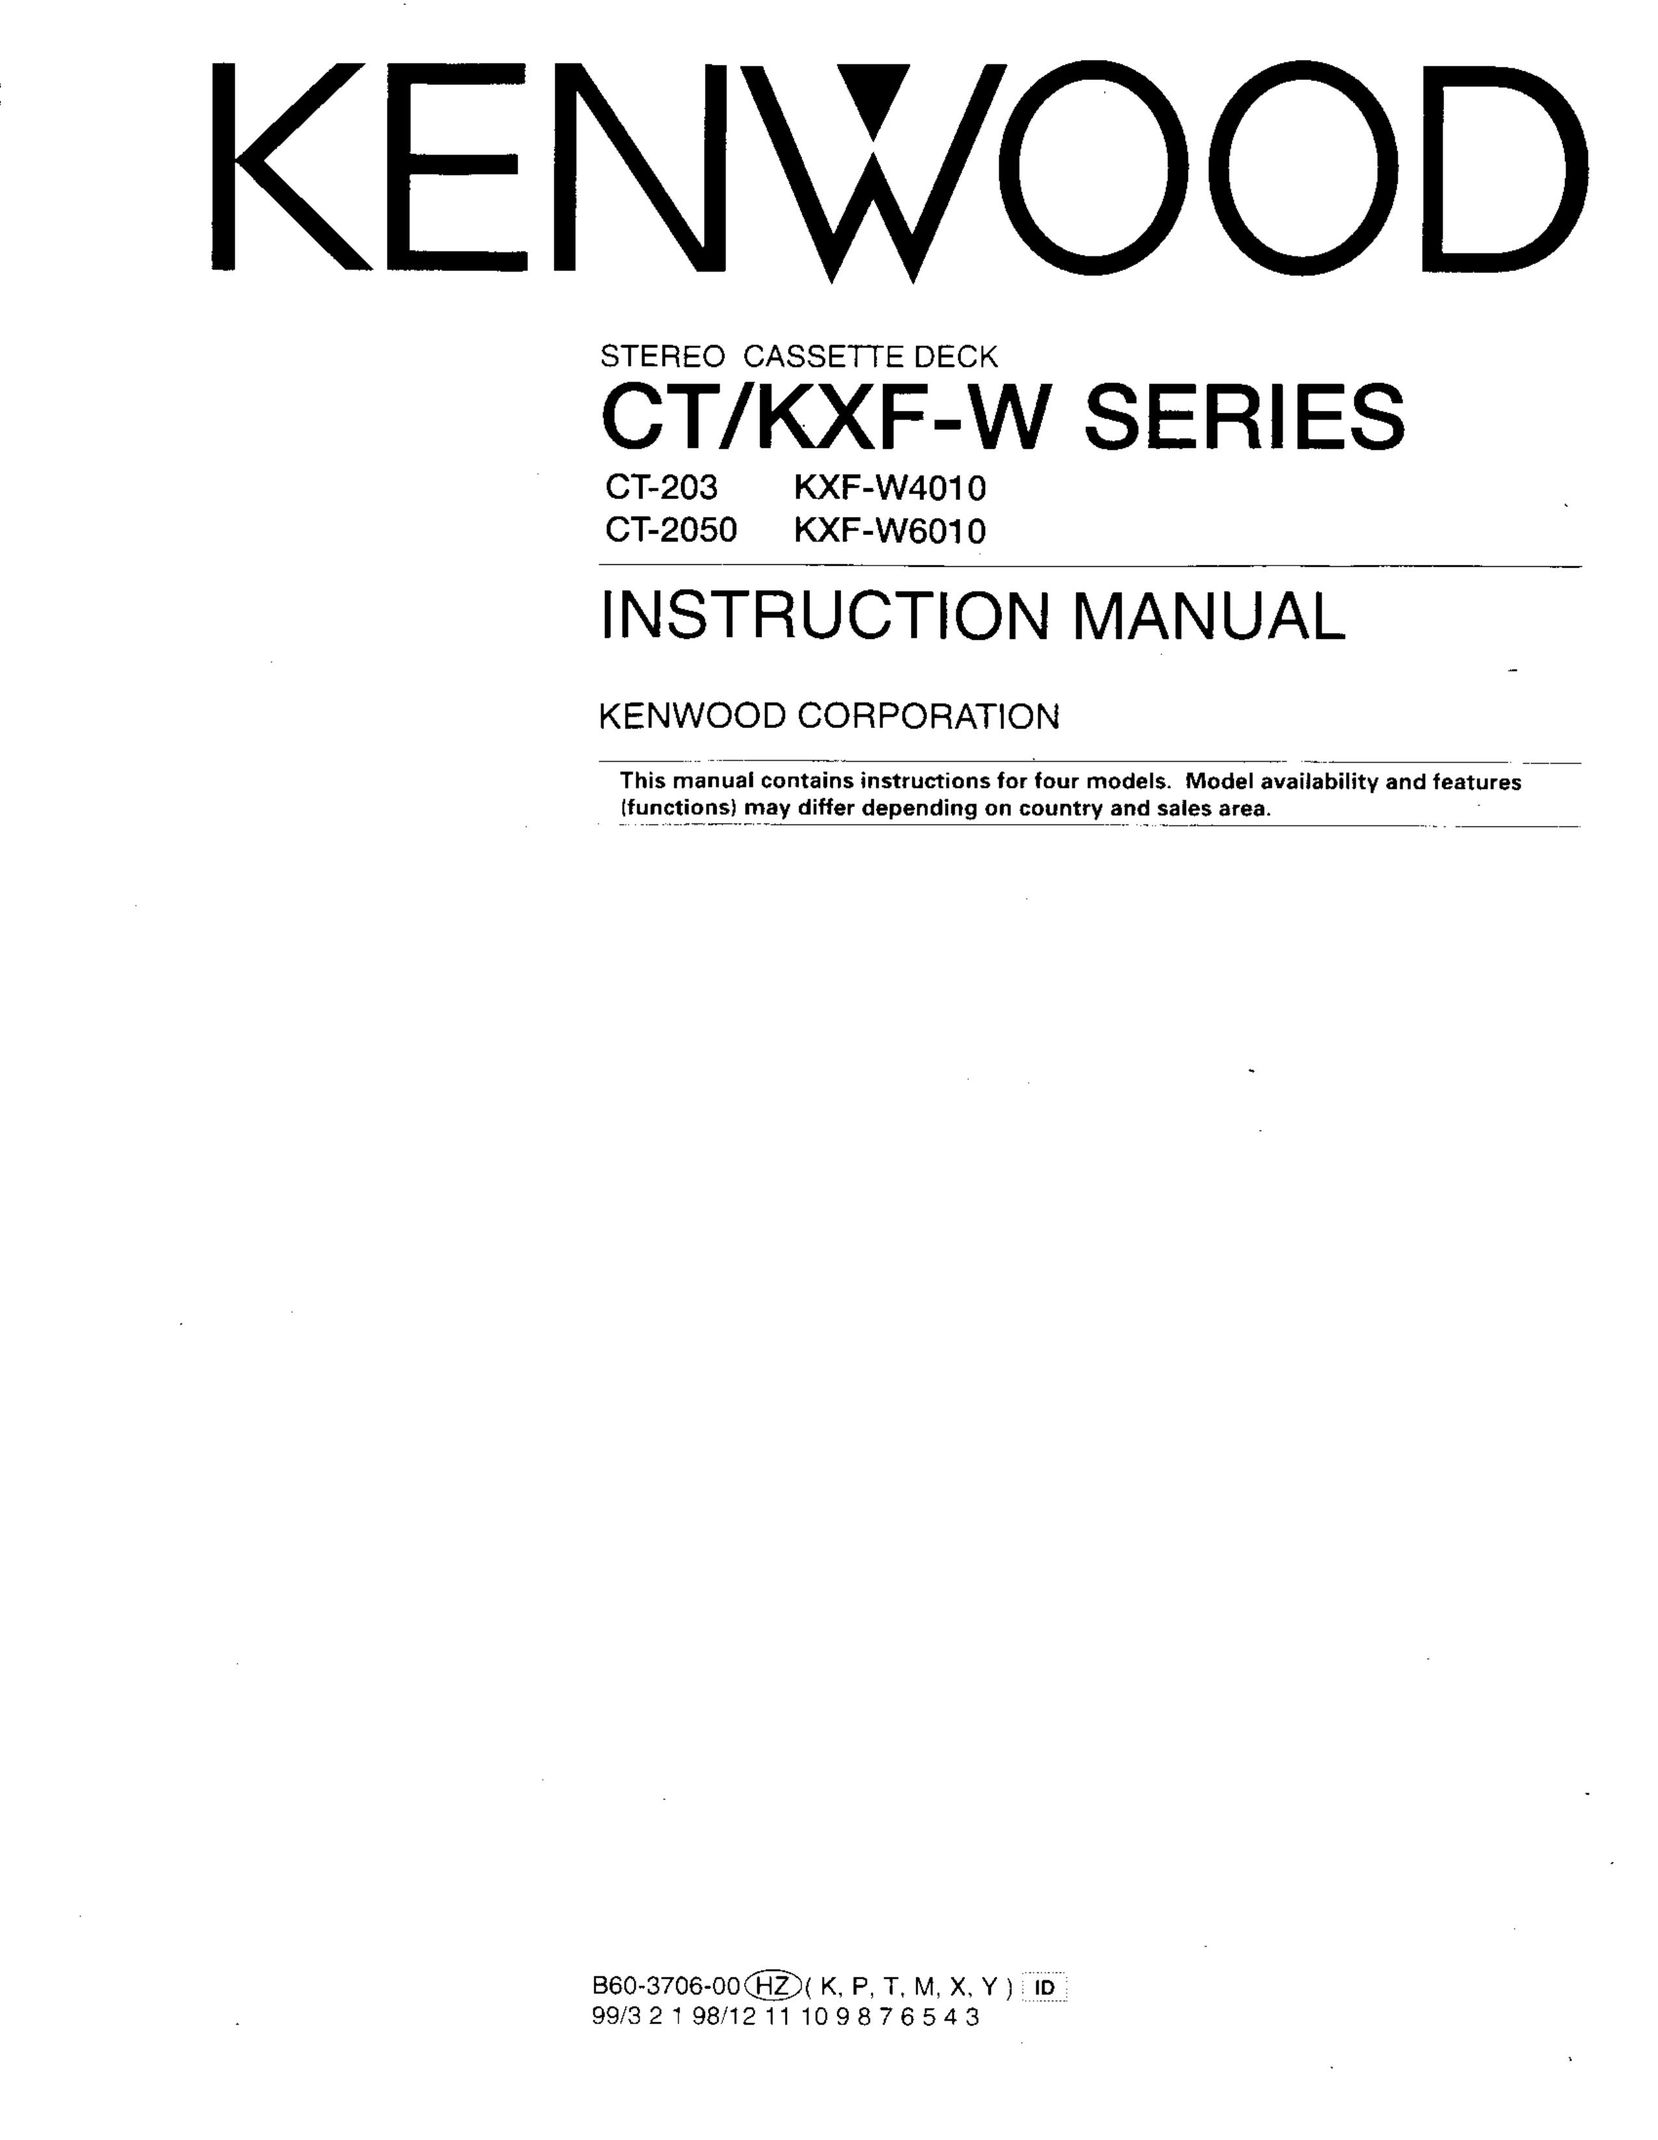 Kenwood CT-203 Car Stereo System User Manual